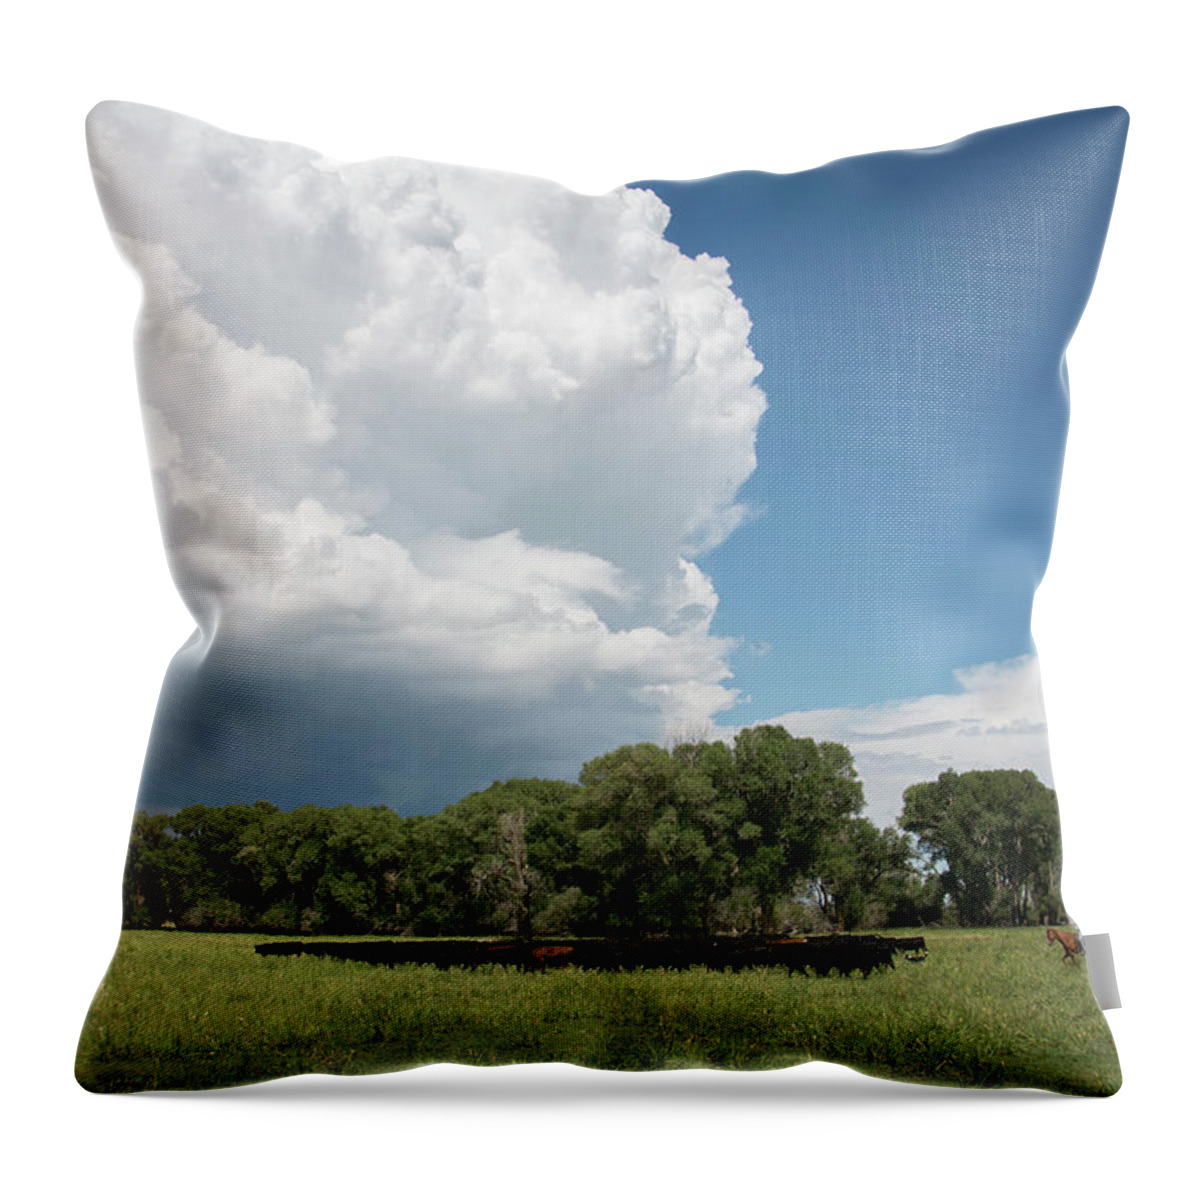 35-39 Years Throw Pillow featuring the photograph A Cowboy And Cowgirl Drive Cattle by Topher Donahue